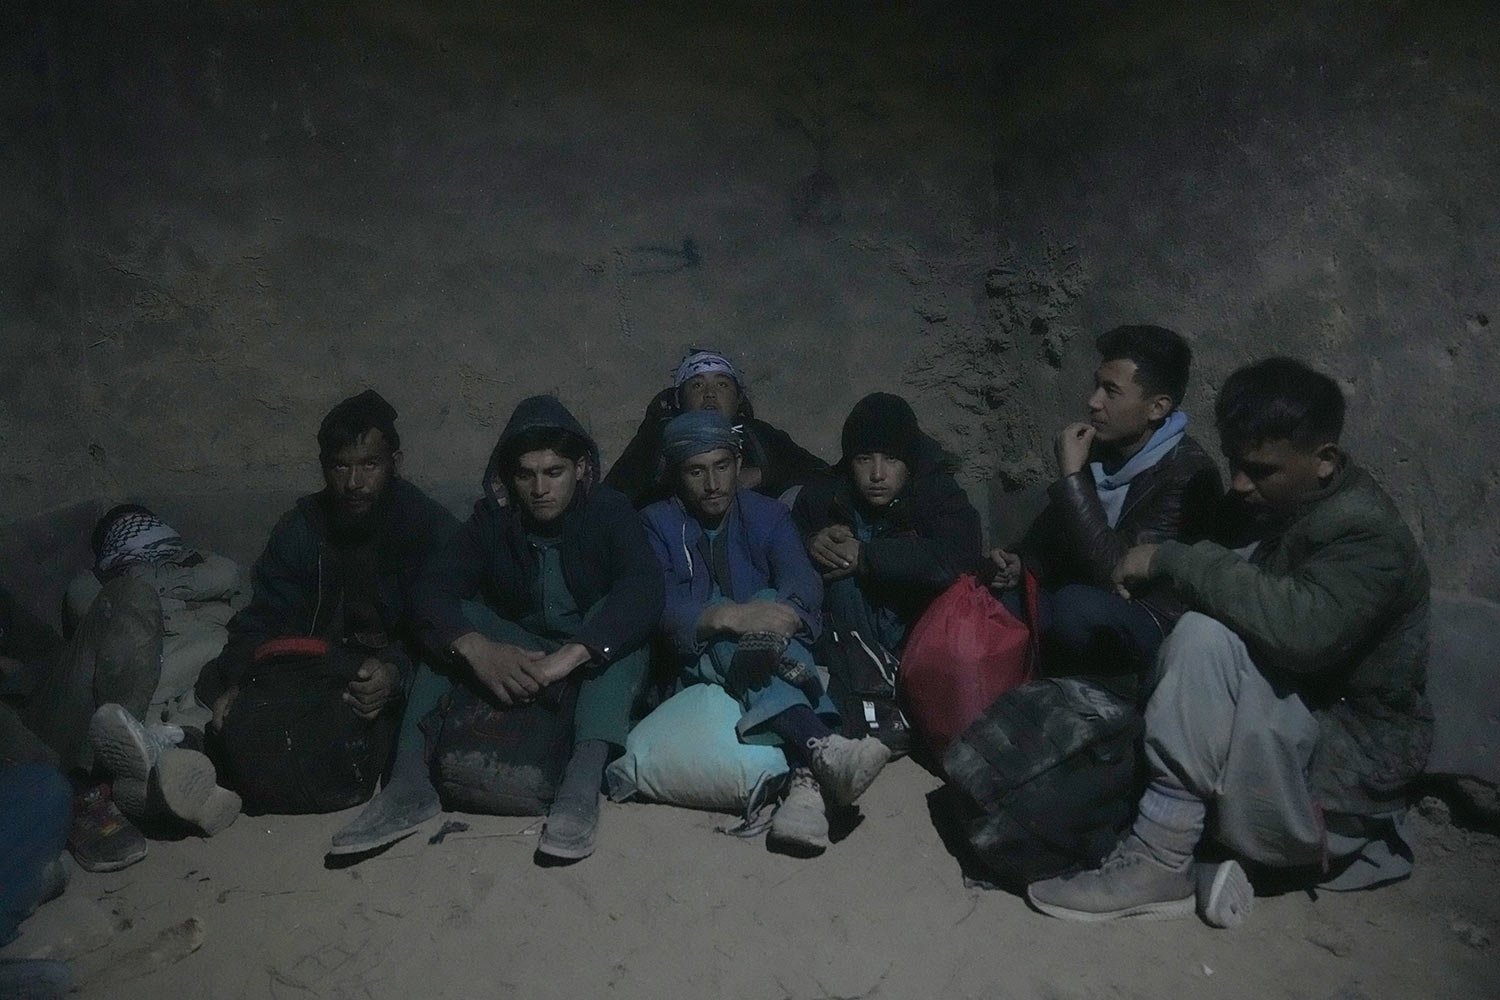  Young Shiite Afghan immigrants wait for midnight in ruins in the desert around the city of Zaranj, Afghanistan, near the the Iran-Afghanistan border wall, to try to cross over the Iranian border wall into Iran, Dec. 25, 2023. (AP Photo/Ebrahim Noroo